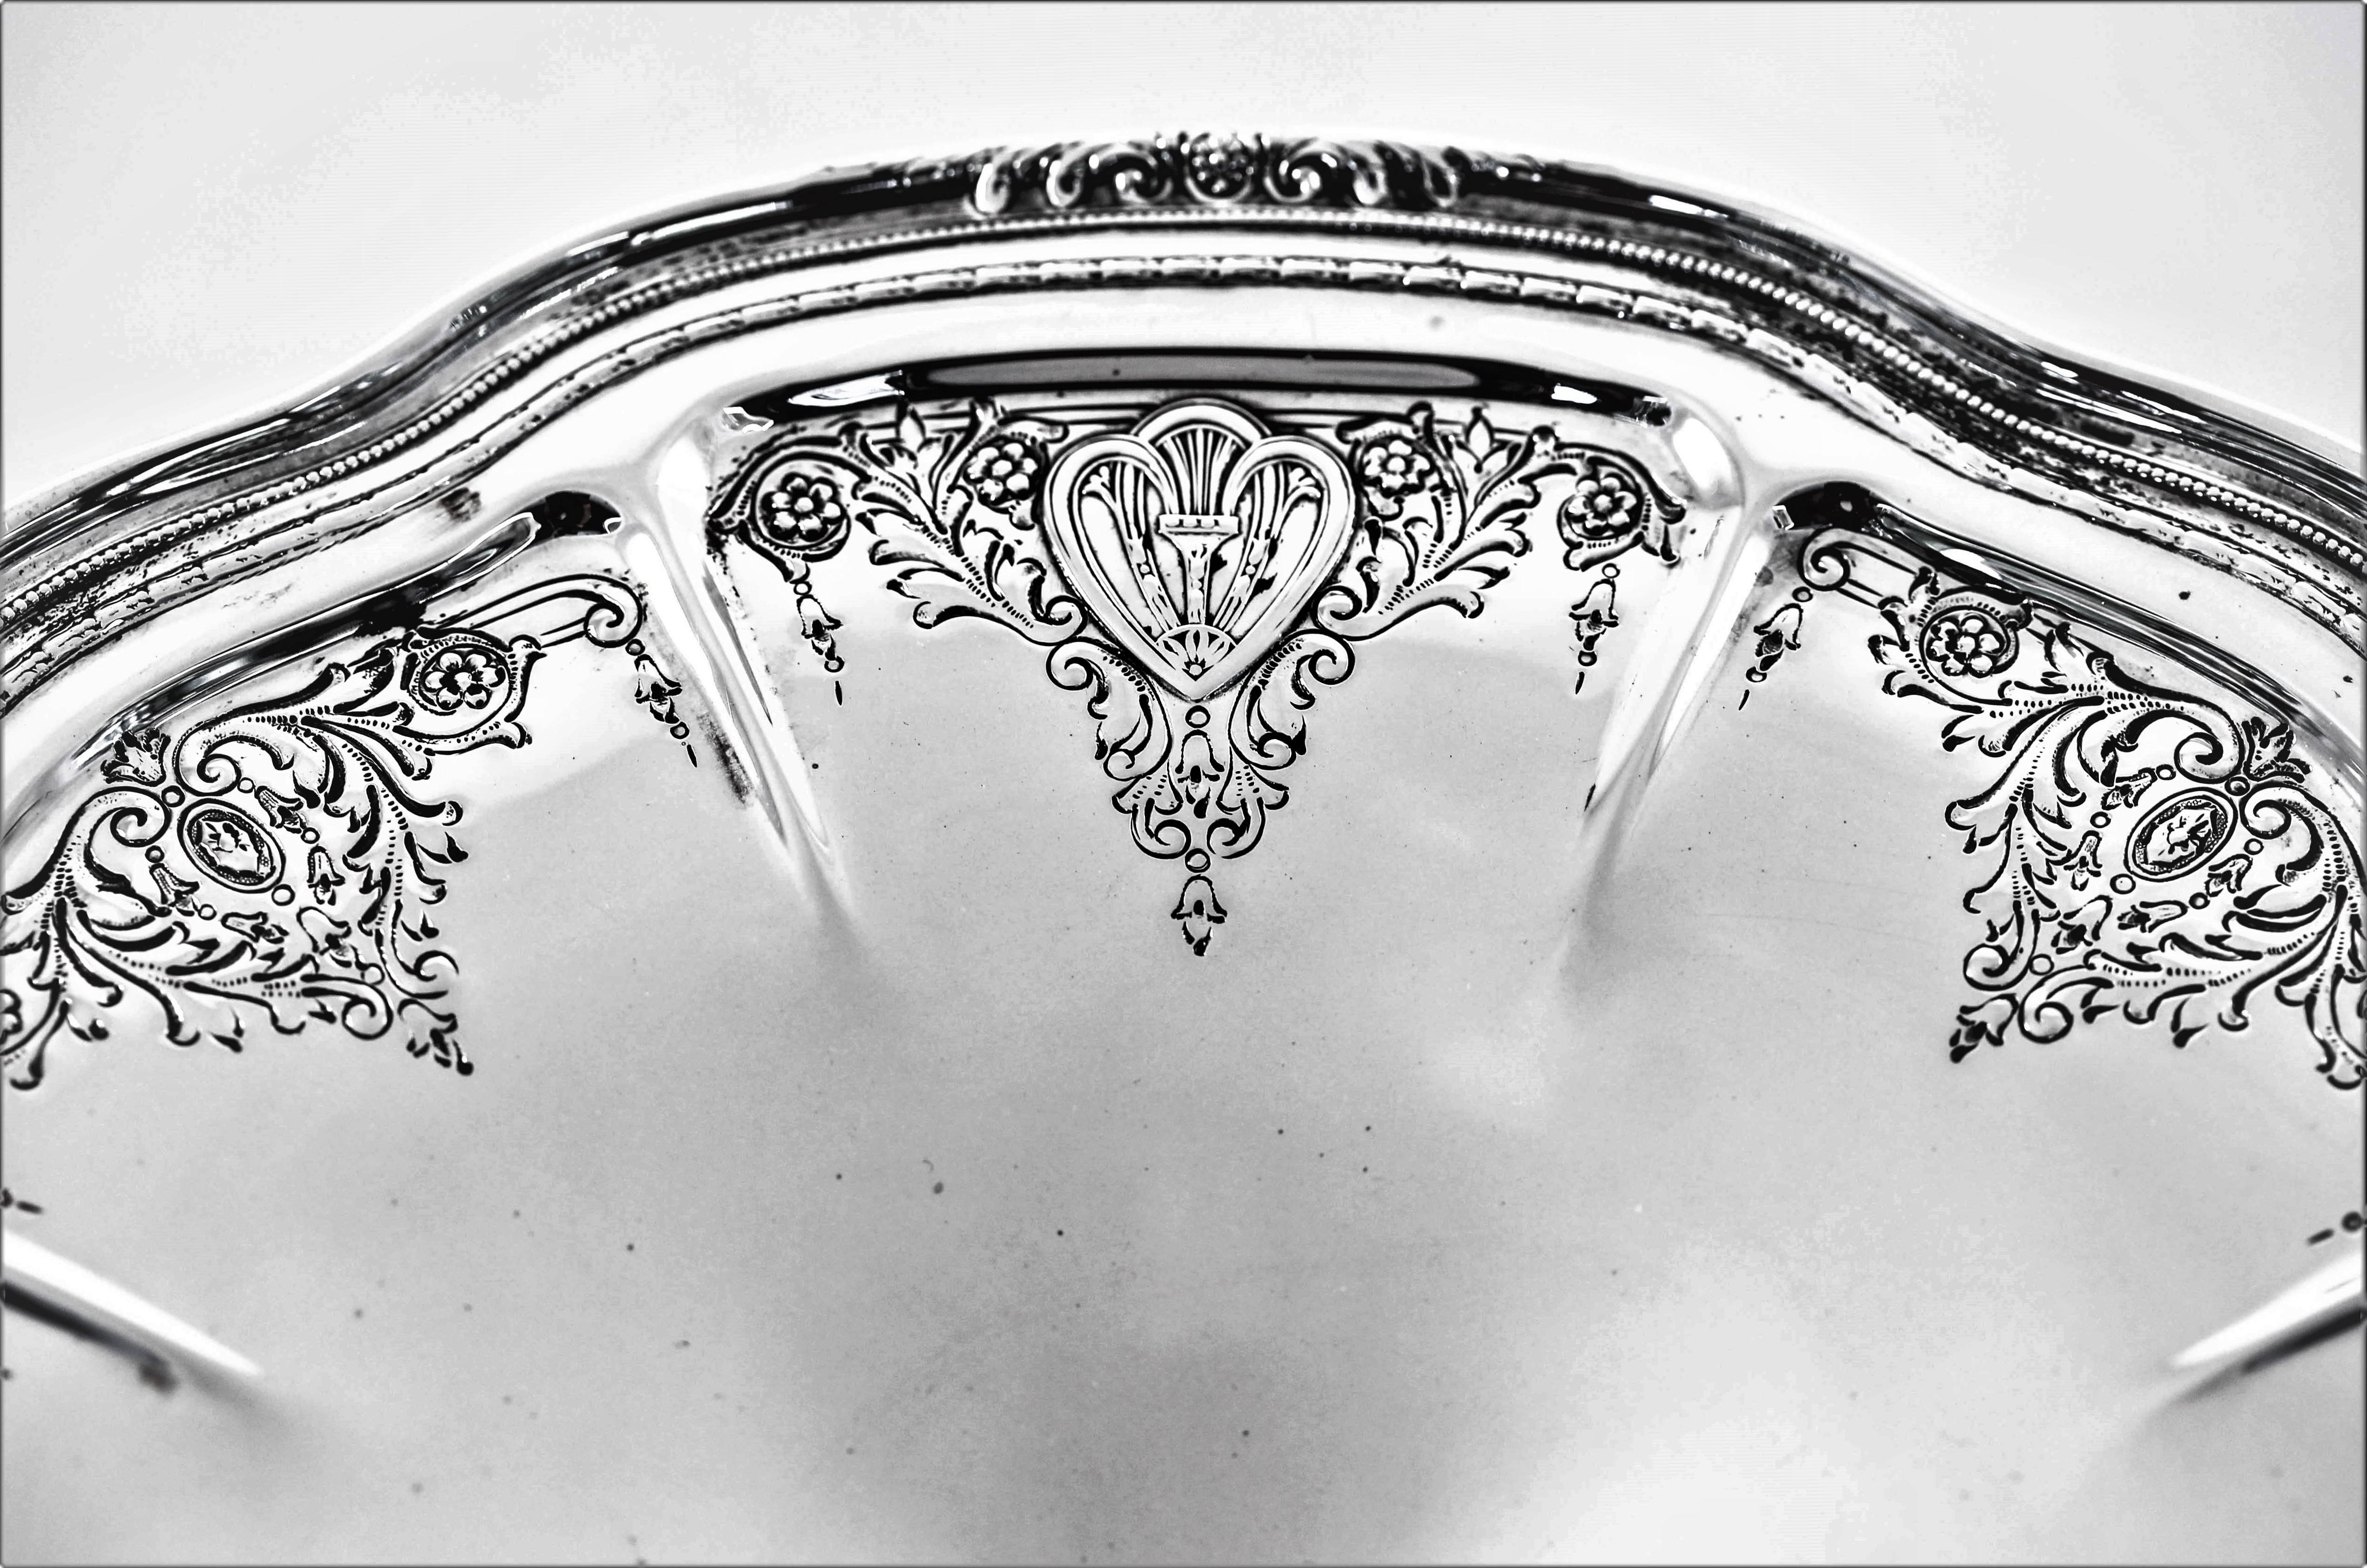 A lovely tazz to use when entertaining. It has a scalloped edge with indentations. Along the inside, eight sets of etched flowers and garlands can be found between each ridge. There is a medallion like design on each alternative one. A rich and